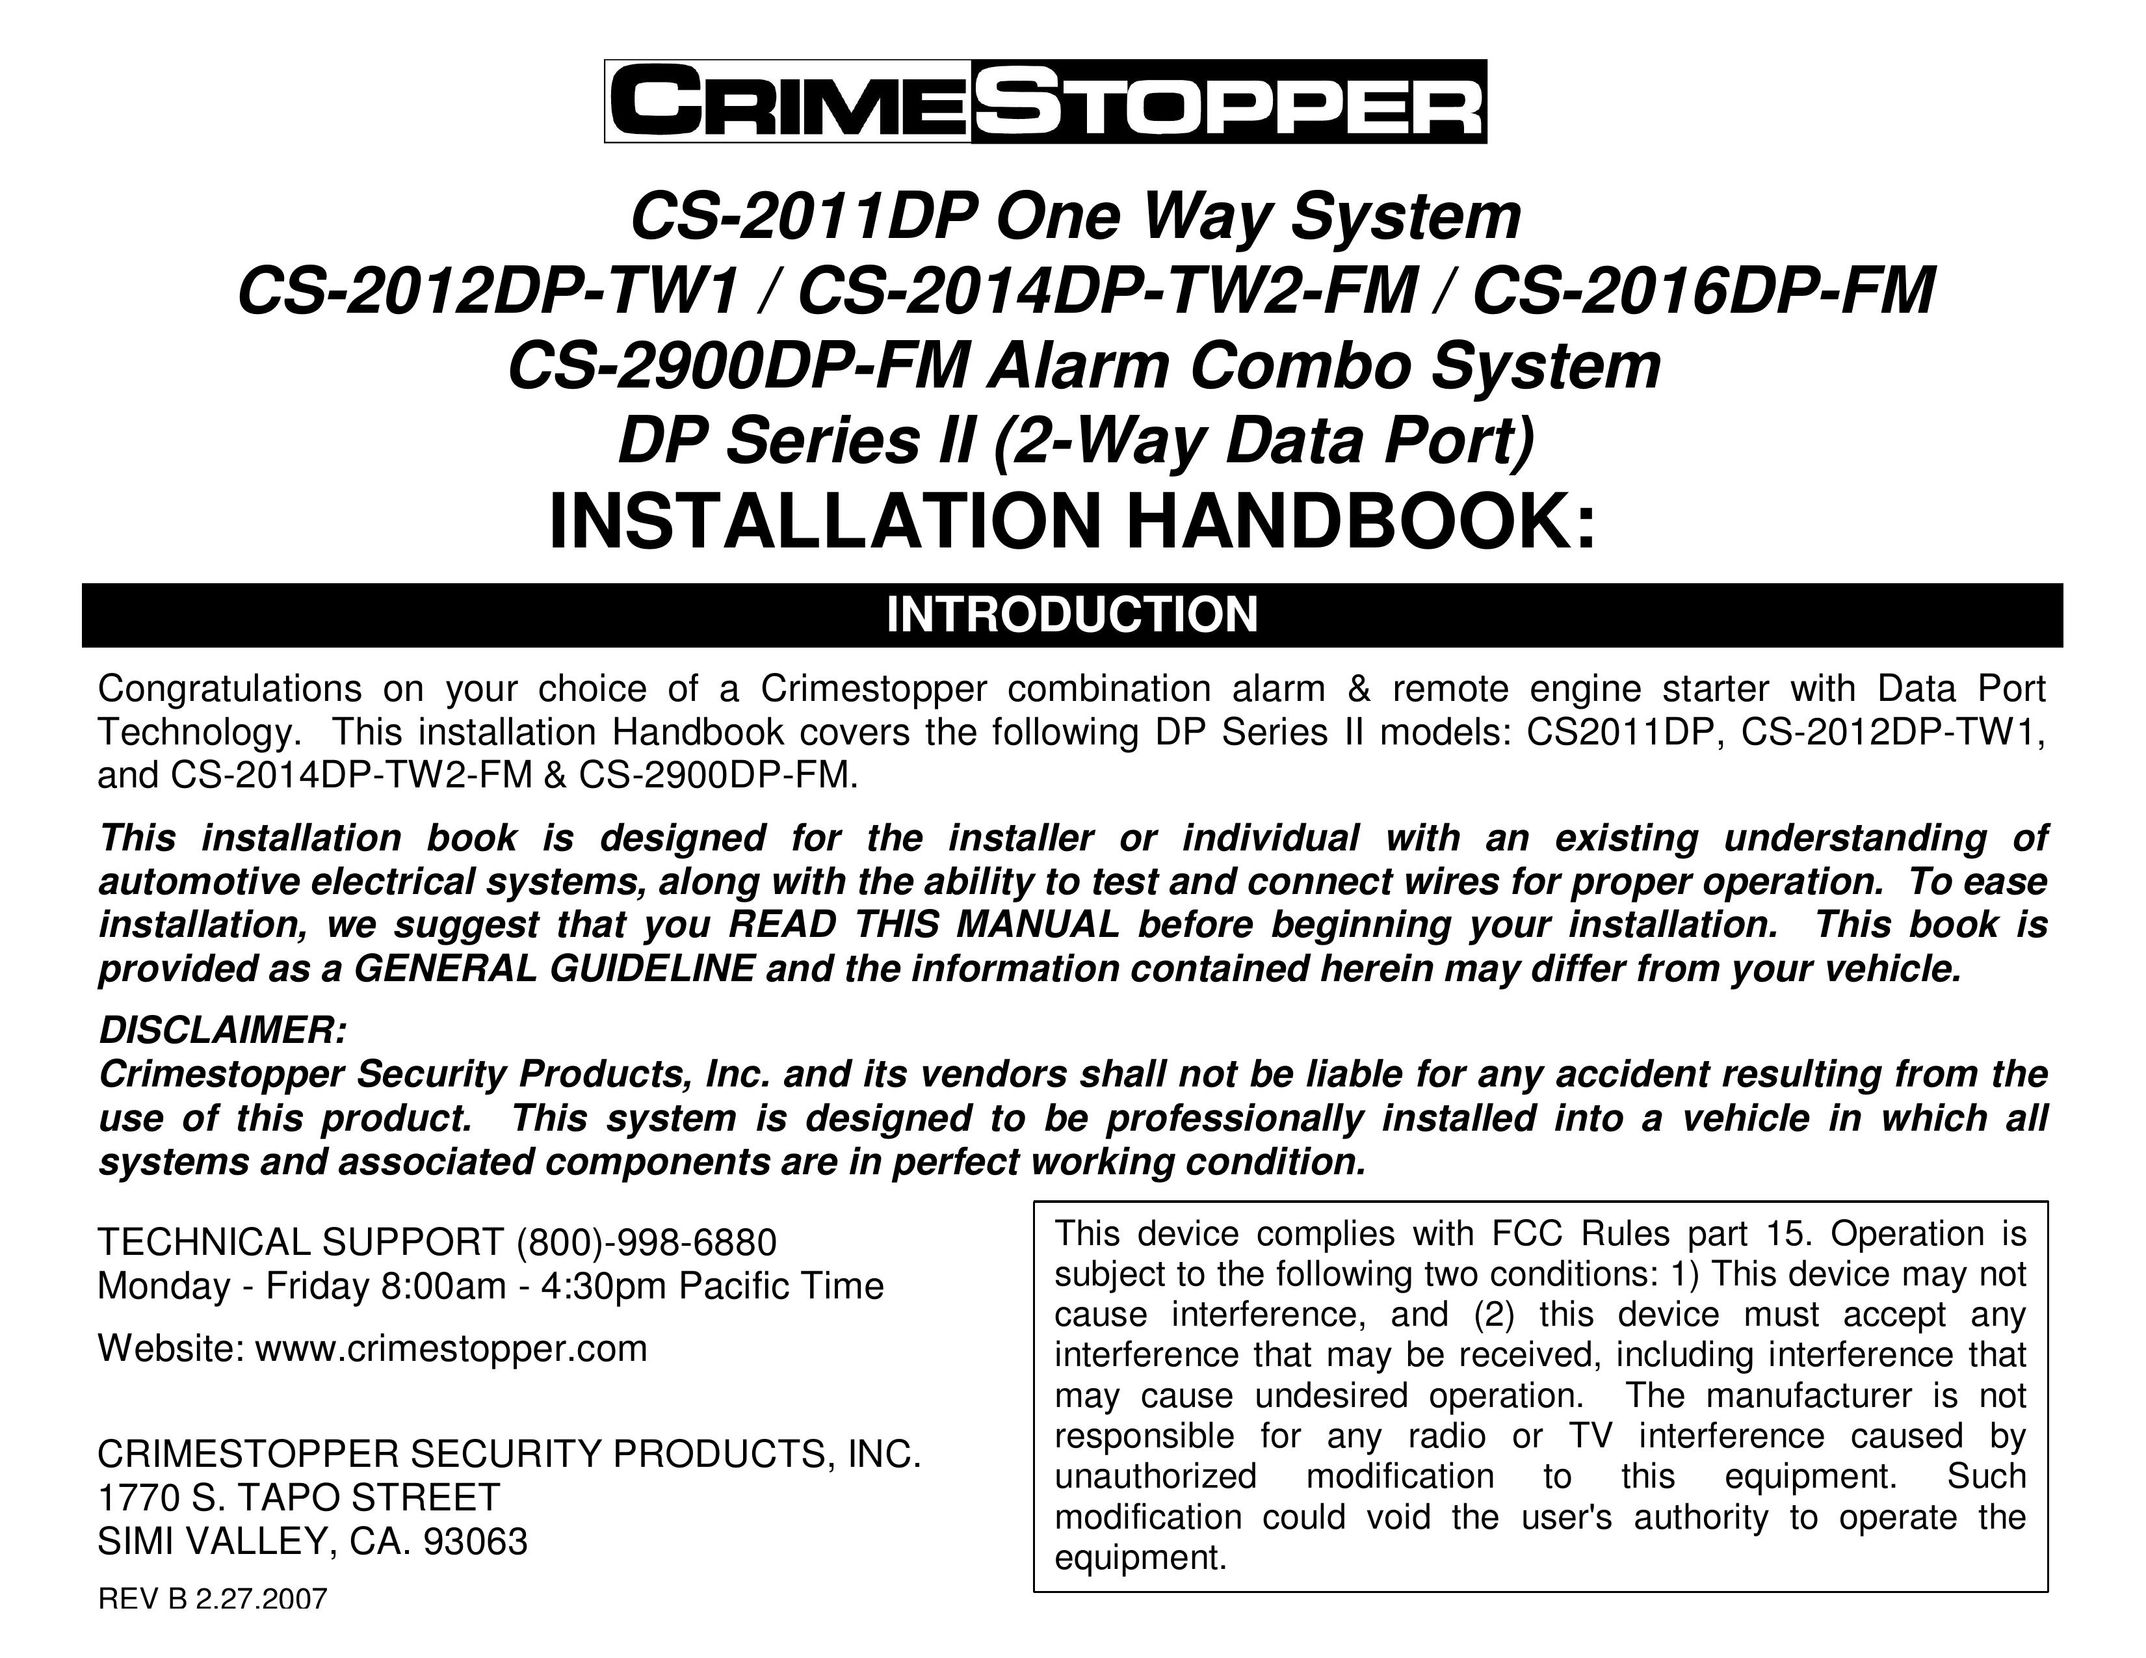 Crimestopper Security Products CS-2014DP-TW2-FM Home Security System User Manual